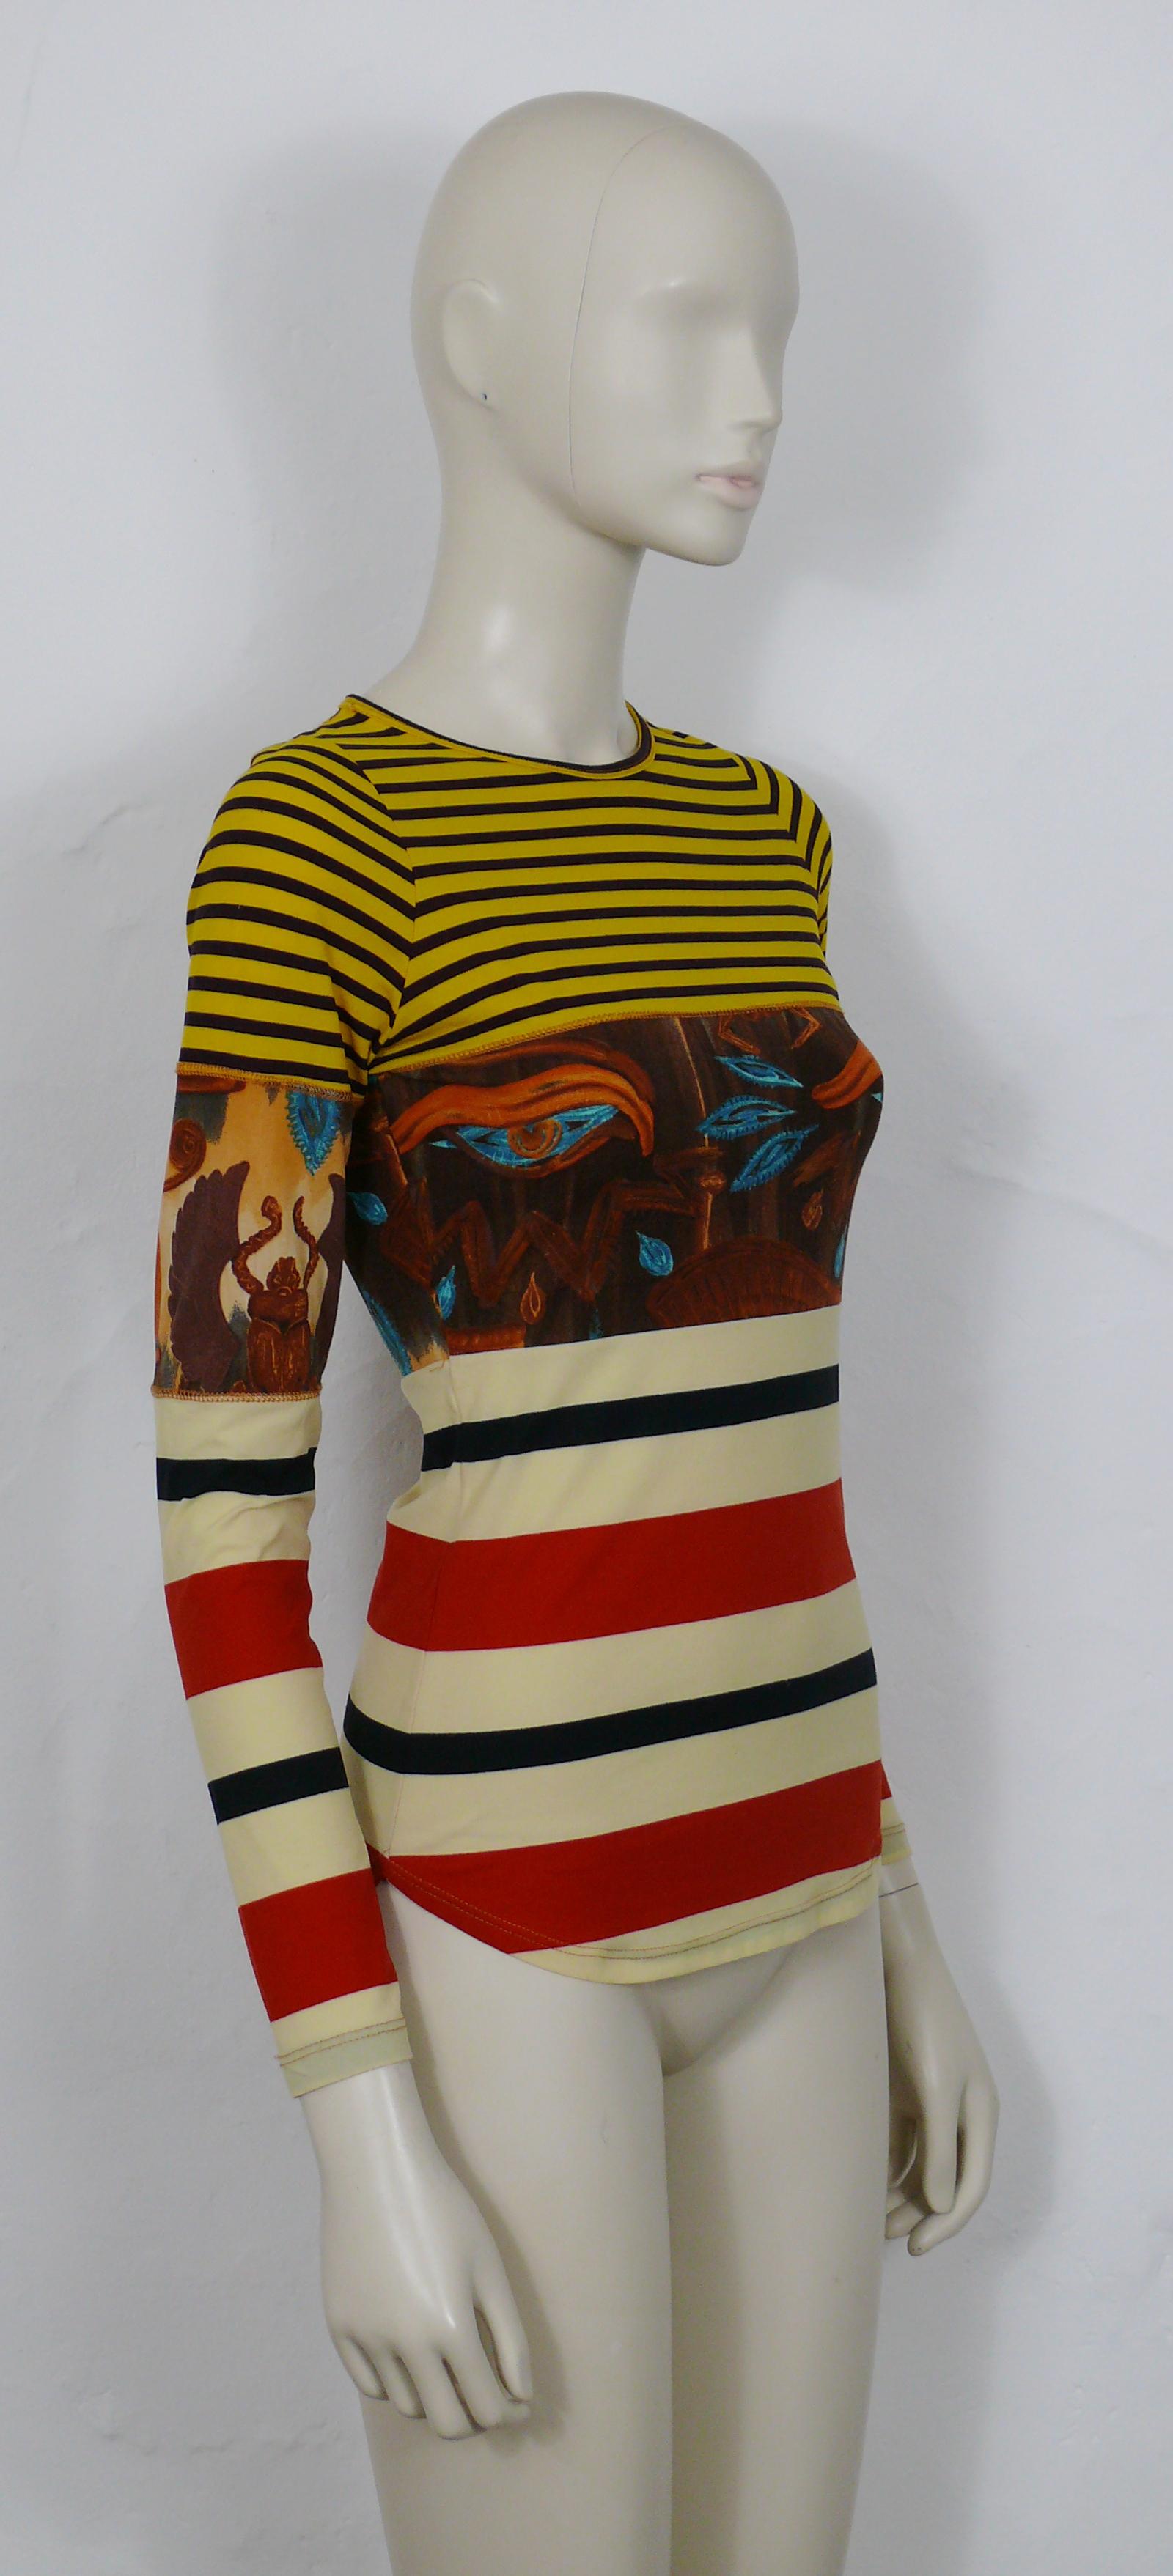 JEAN PAUL GAULTIER vintage stretch top featuring multicolored stripes and Egyptian symbols : eyes, scarabs, cartouches and hieroglyphs.

Label reads GAULTIER JEAN'S.

Missing composition tag.

Missing size tag.
Please refer to